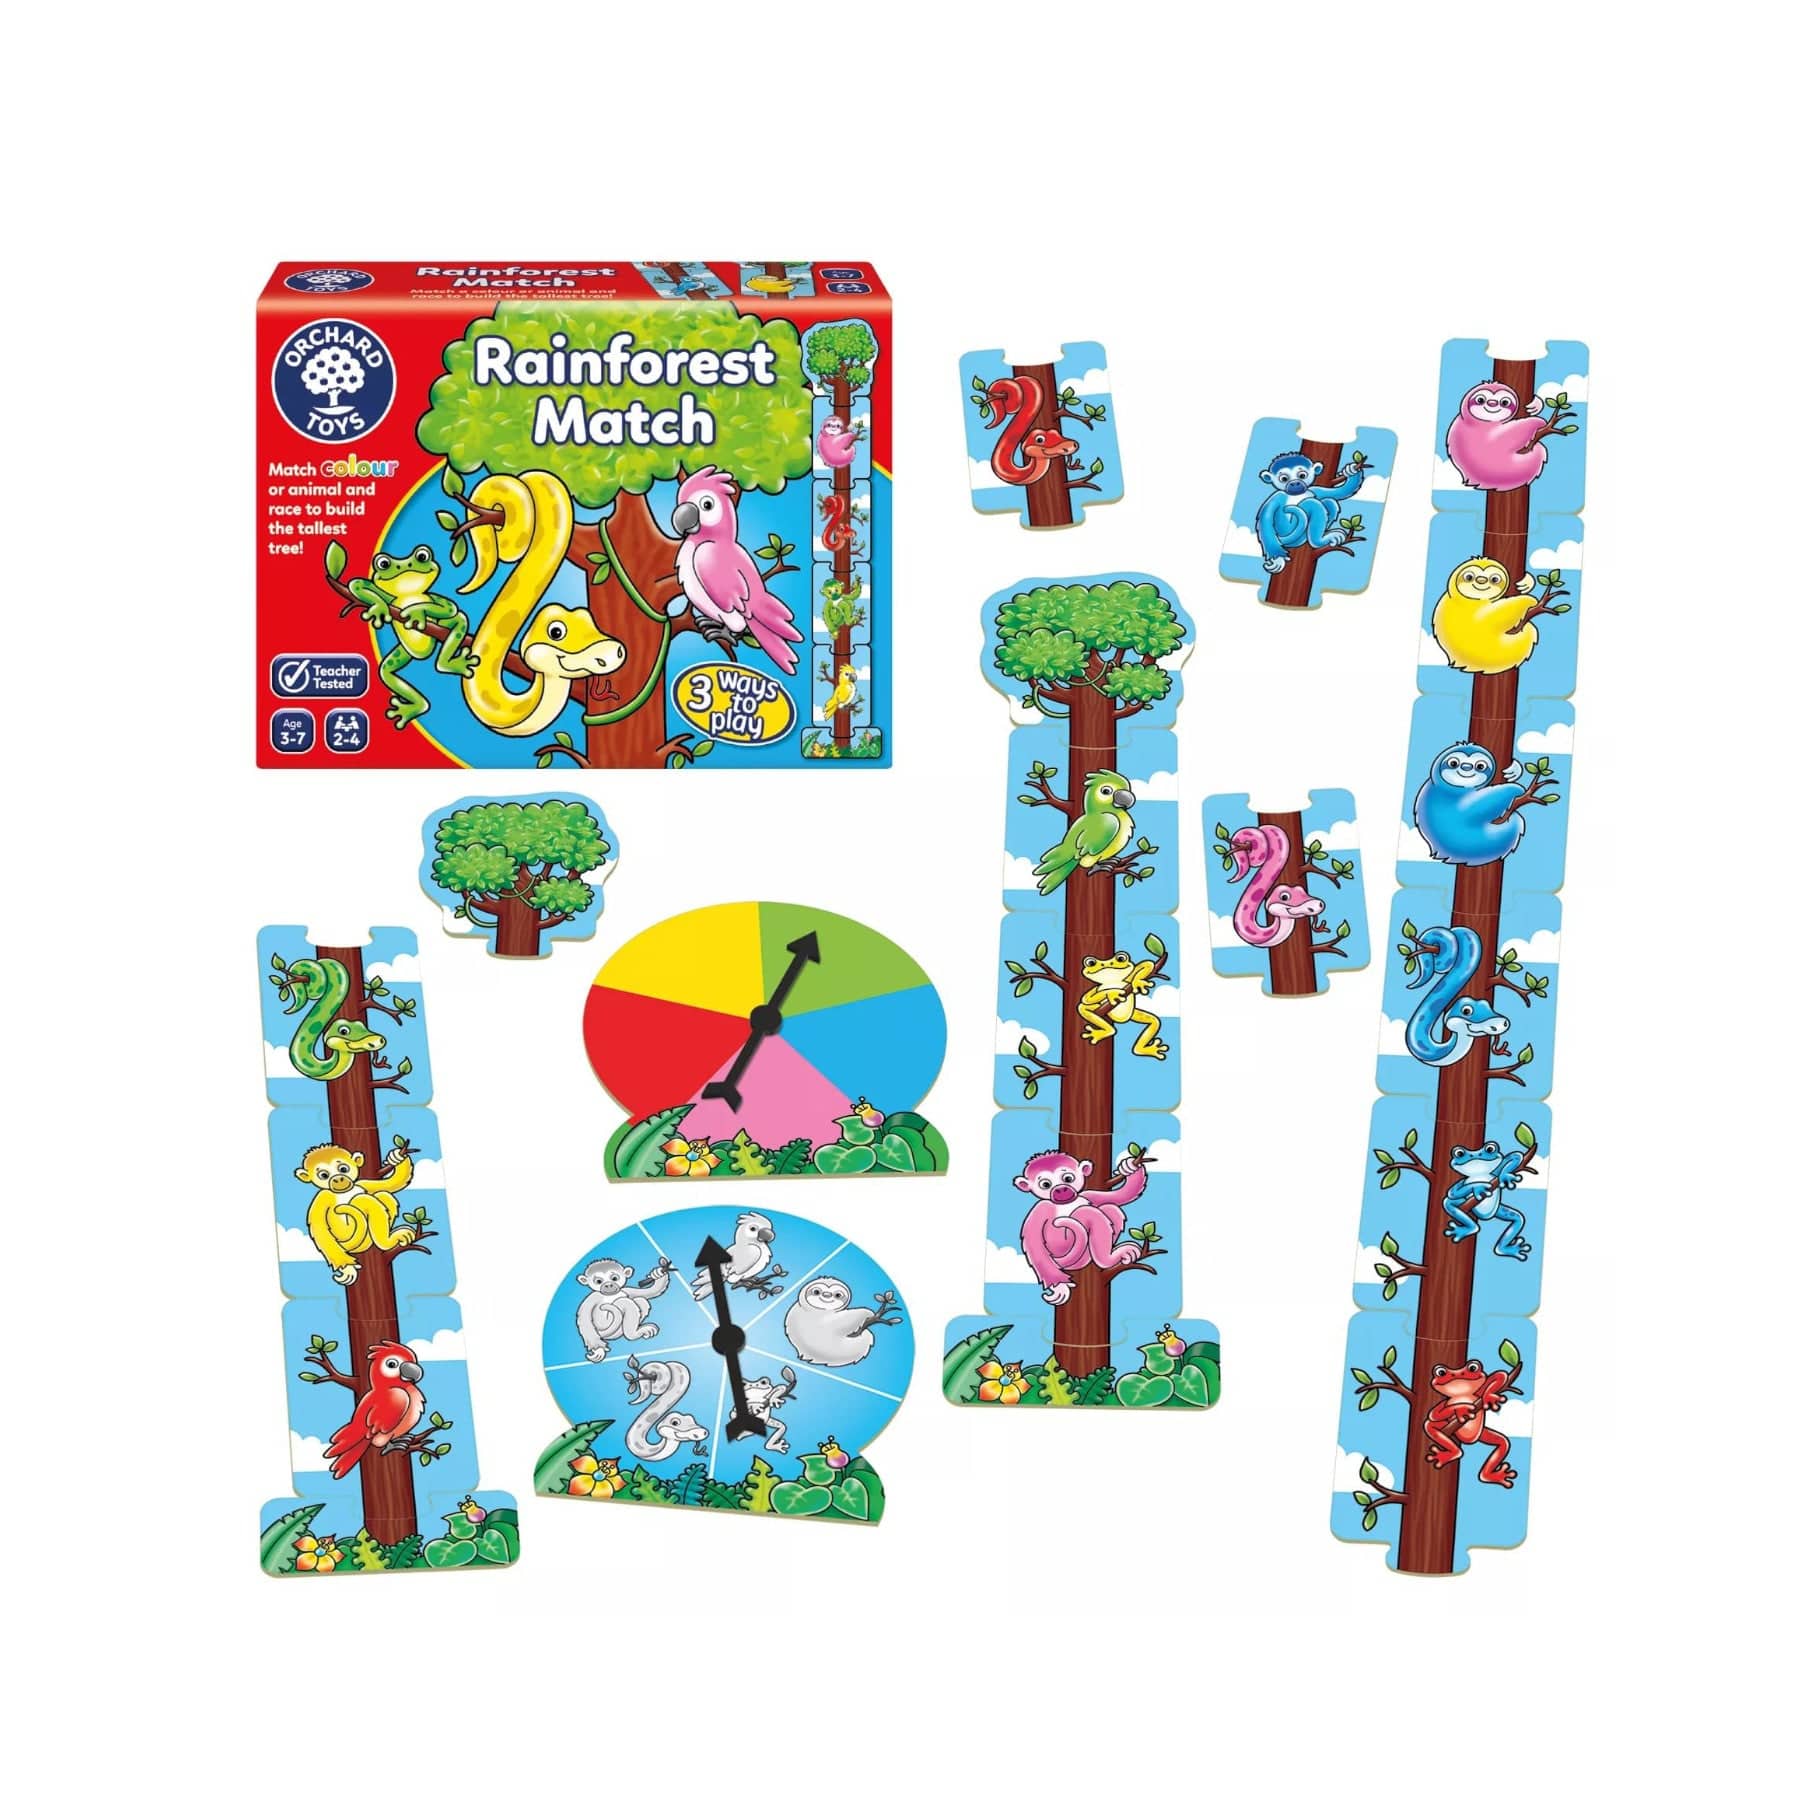 Rainforest themed children's game "Rainforest Match" by Orchard Toys, featuring colorful animal game pieces on tree-shaped stands with a match and build concept, illustrated box showcasing three ways to play, including clock face with spinning arrow for gameplay.